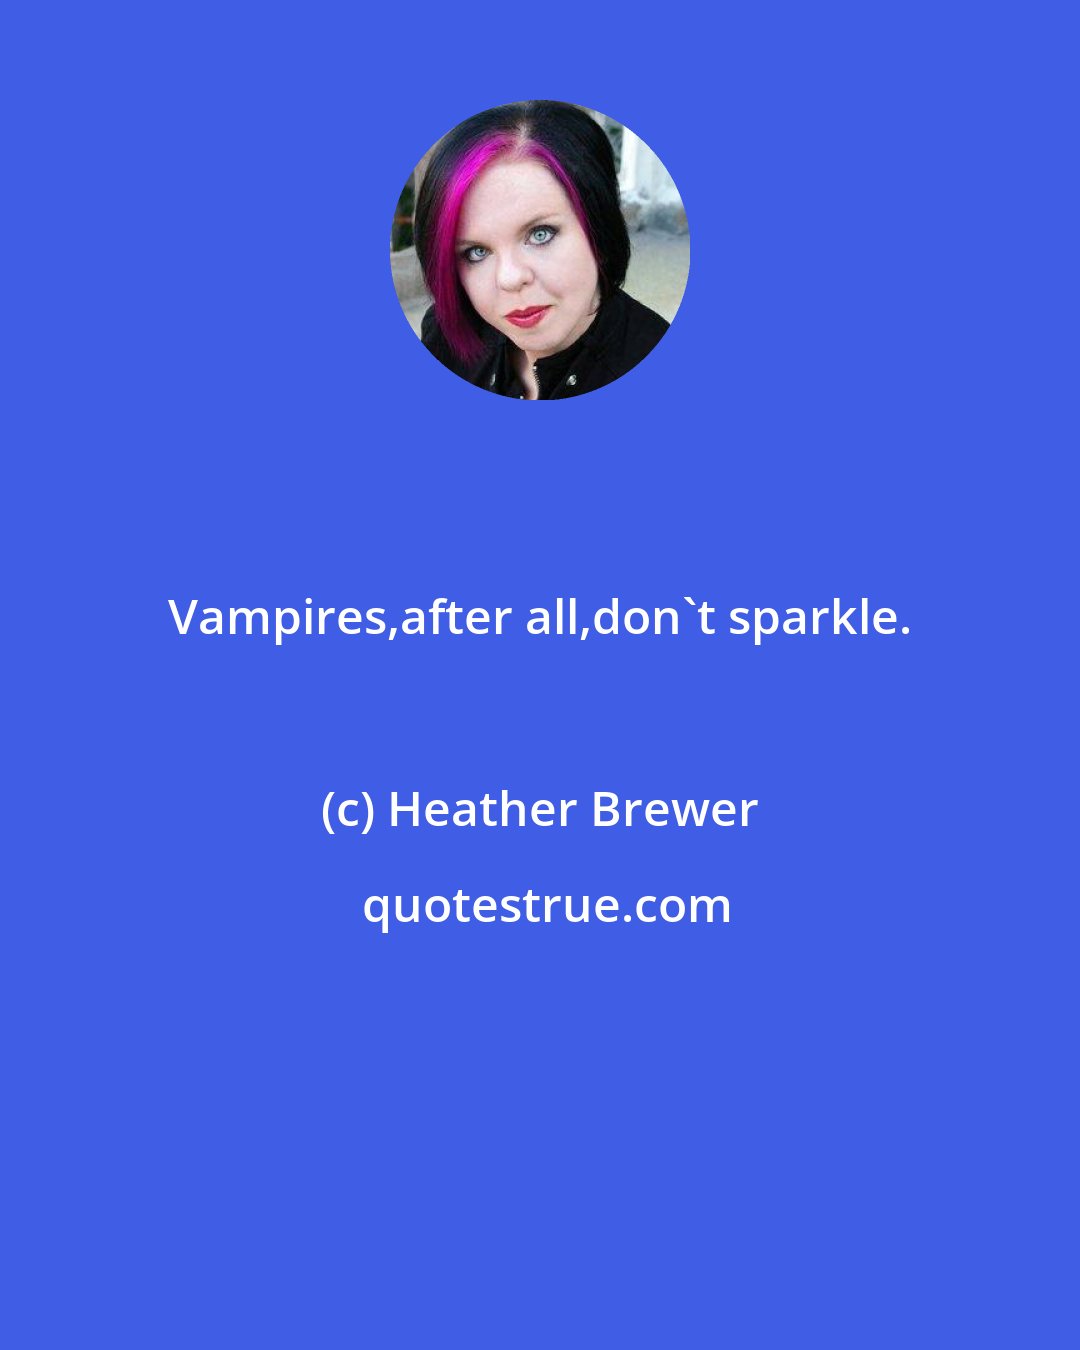 Heather Brewer: Vampires,after all,don't sparkle.